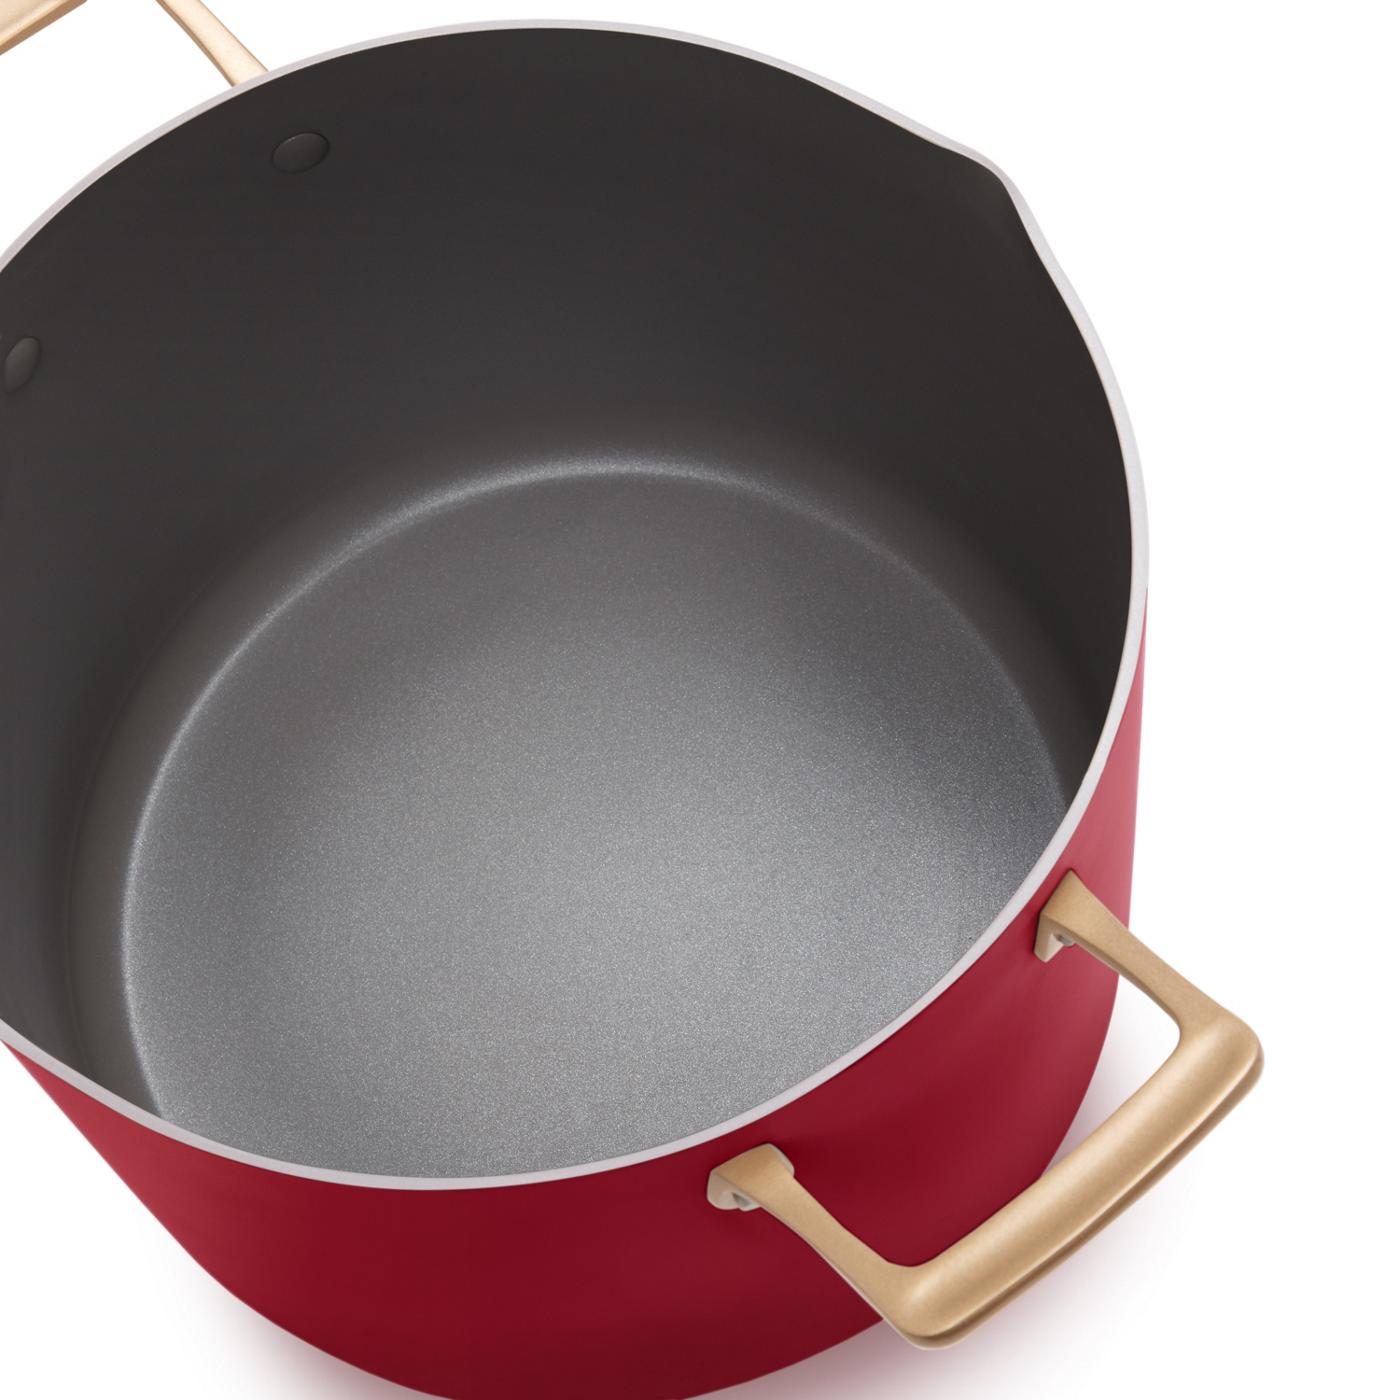 Kitchen & Table by H-E-B Enameled Cast Iron Skillet - Bordeaux Red